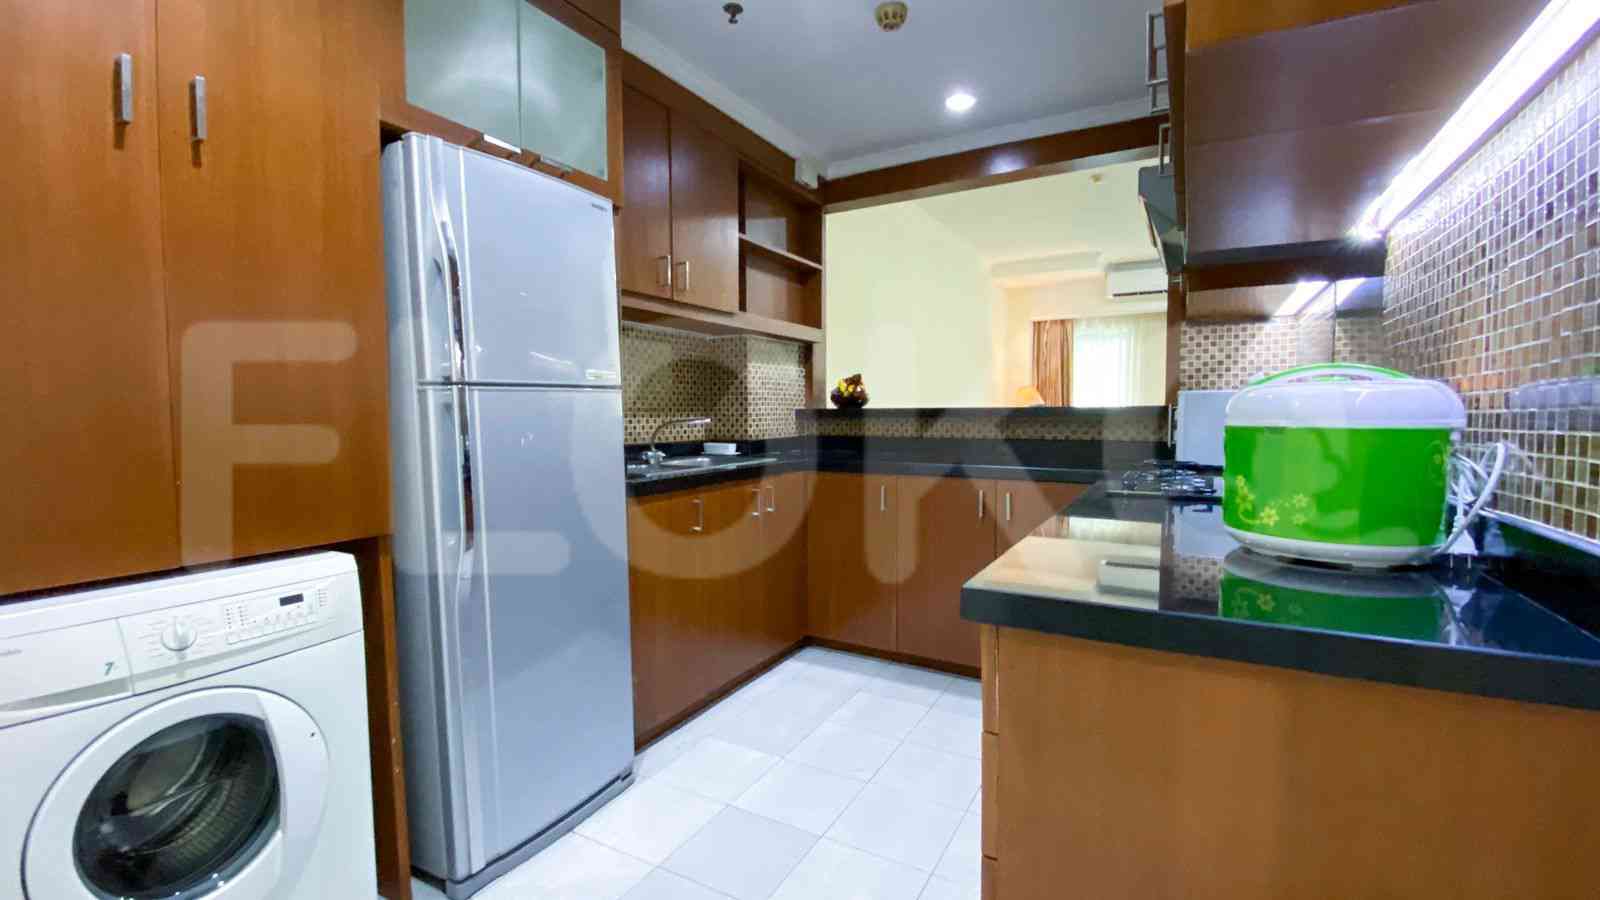 2 Bedroom on 2nd Floor for Rent in Kemang Apartment by Pudjiadi Prestige - fke6bf 8